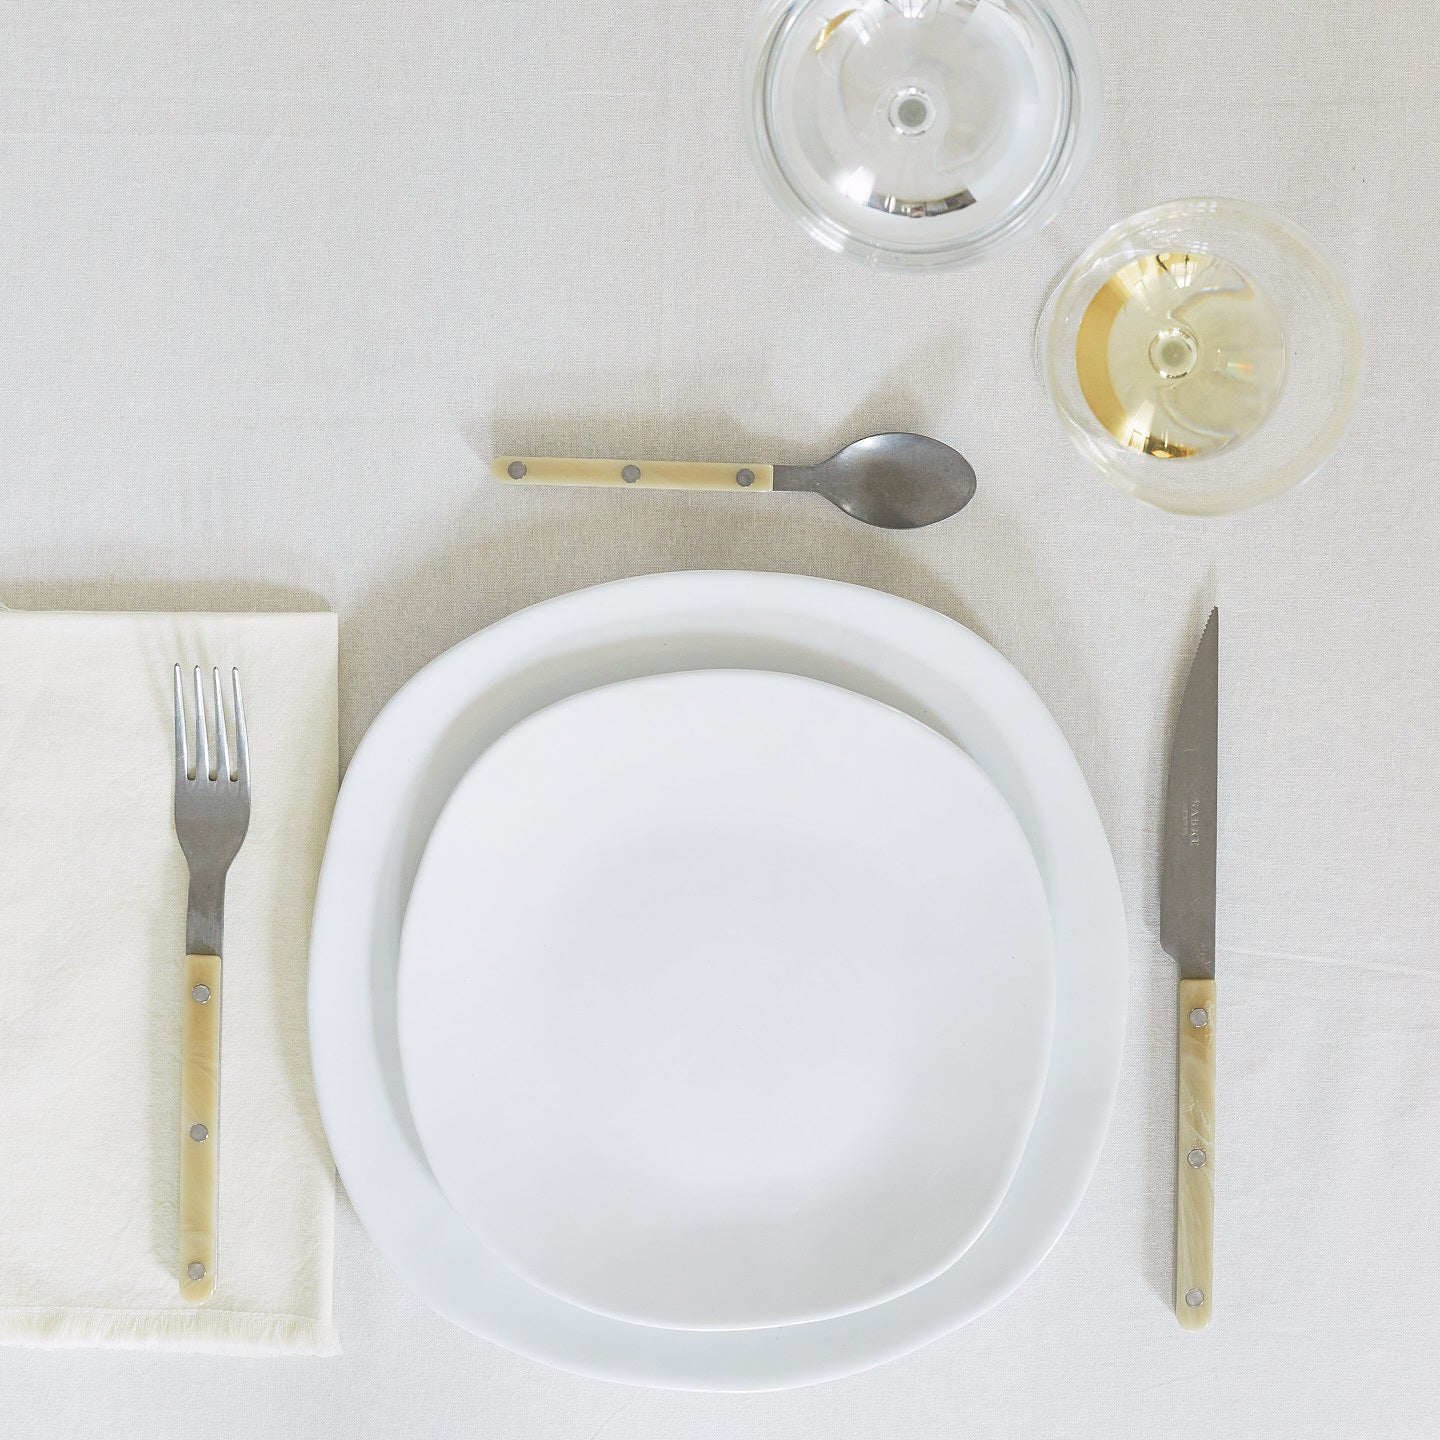 Placesetting of white Strata dinnerware on white tablecloth.